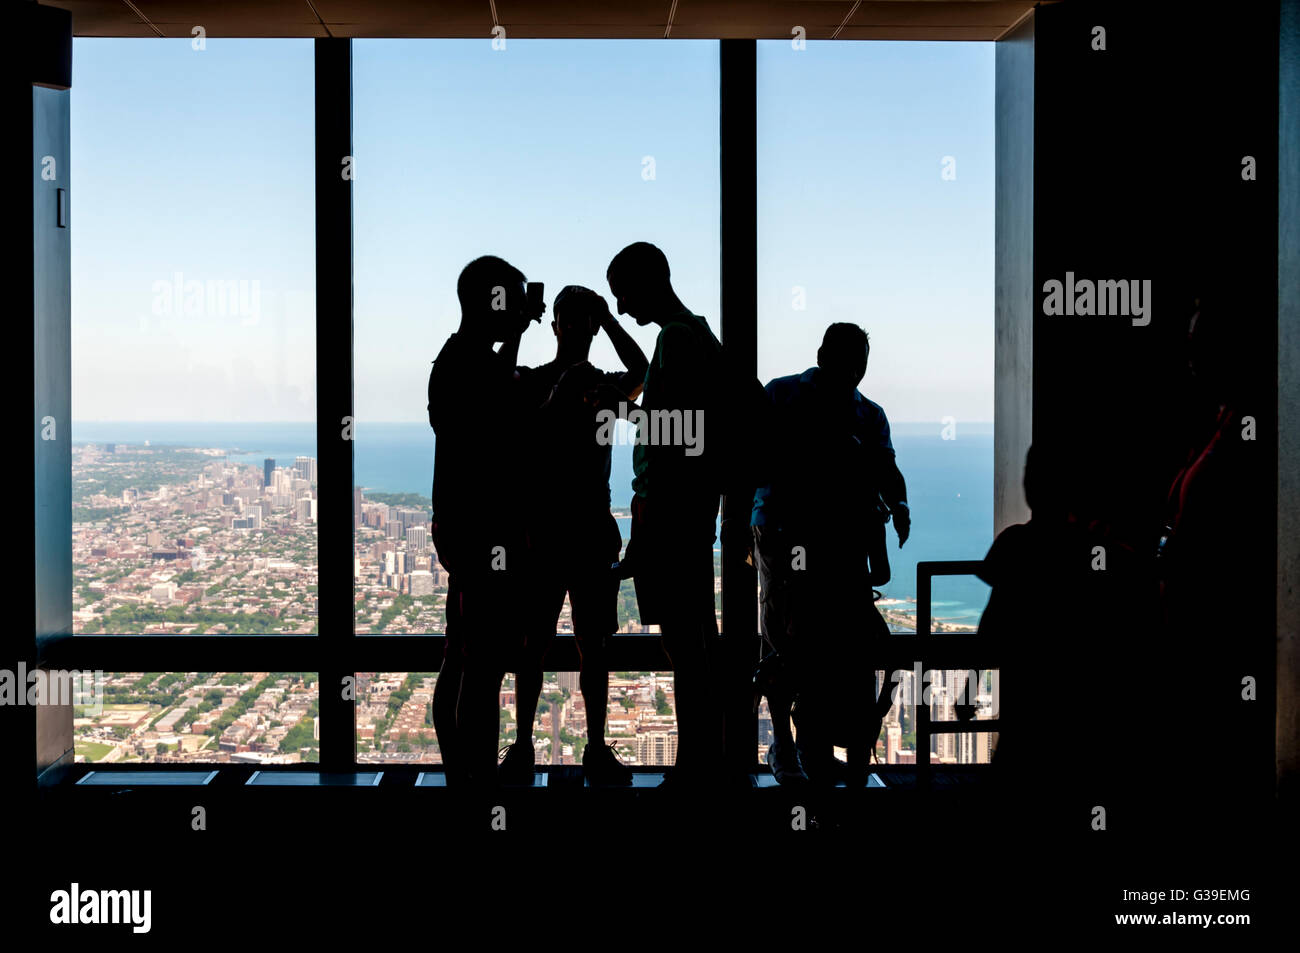 Silhouette of people photographing Chicago with their mobile 'phones from the observation deck of the Willis Tower. Stock Photo